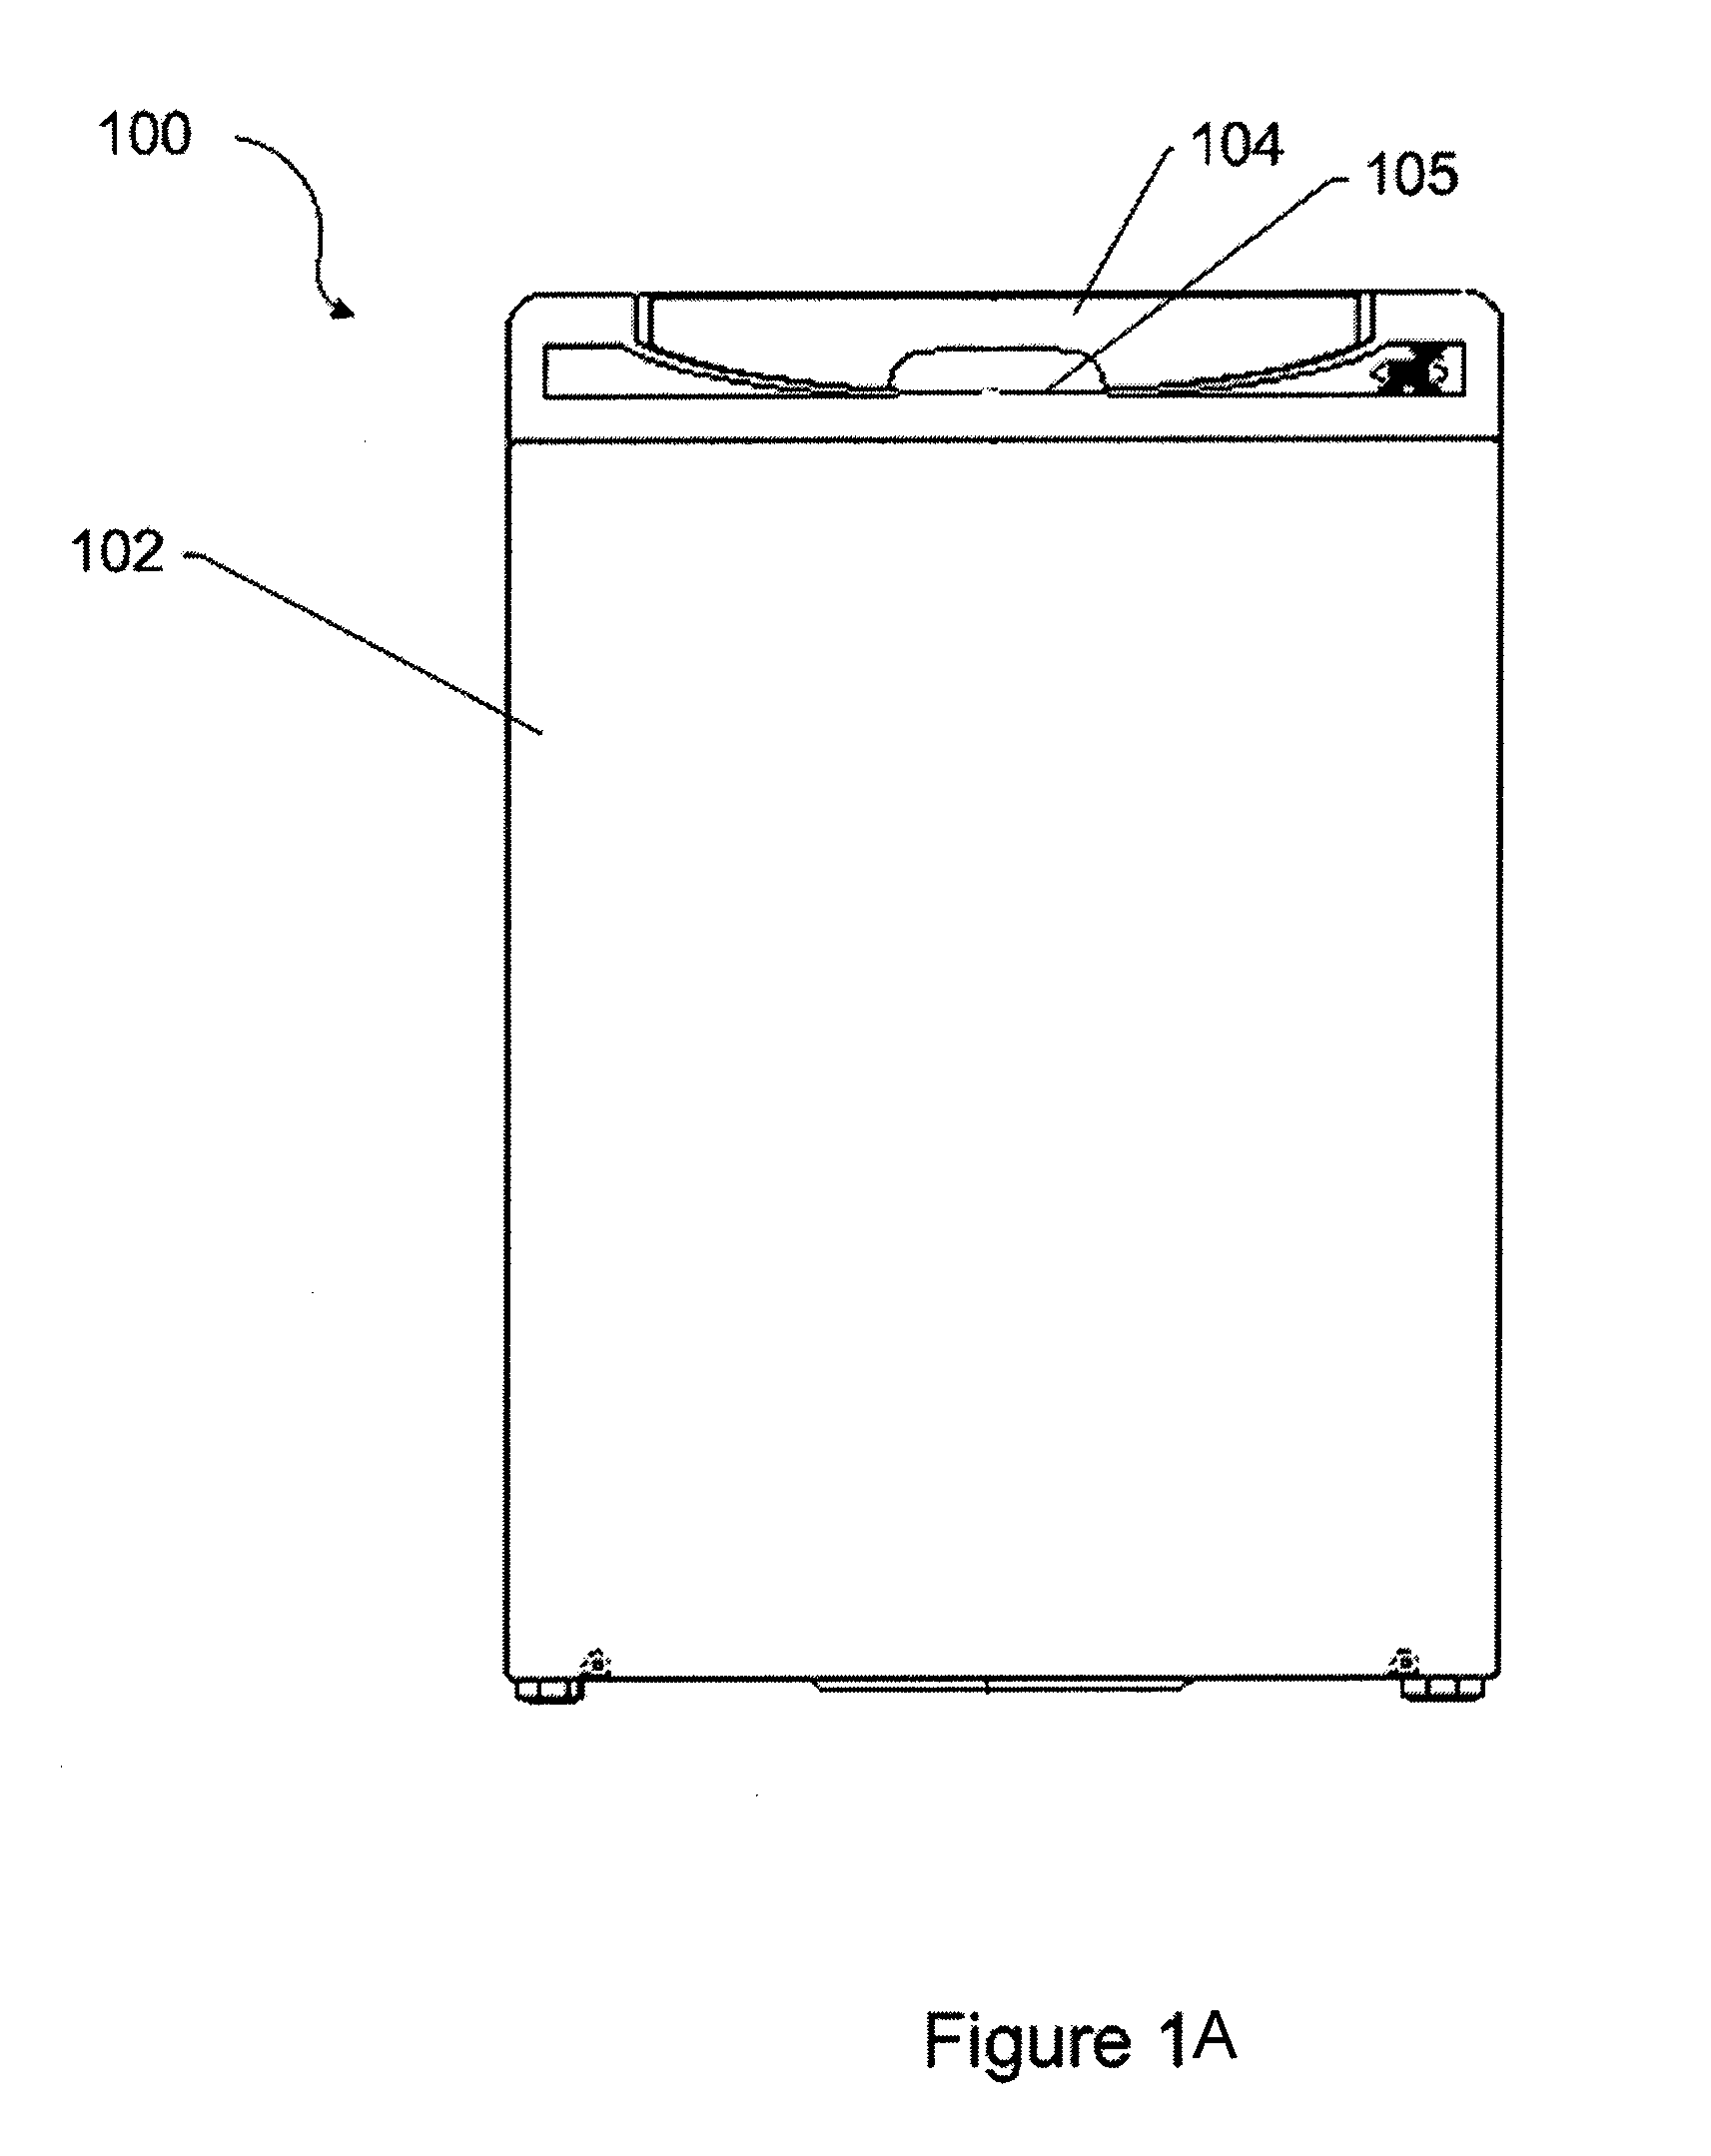 Appliance with user interface having multi-user mode